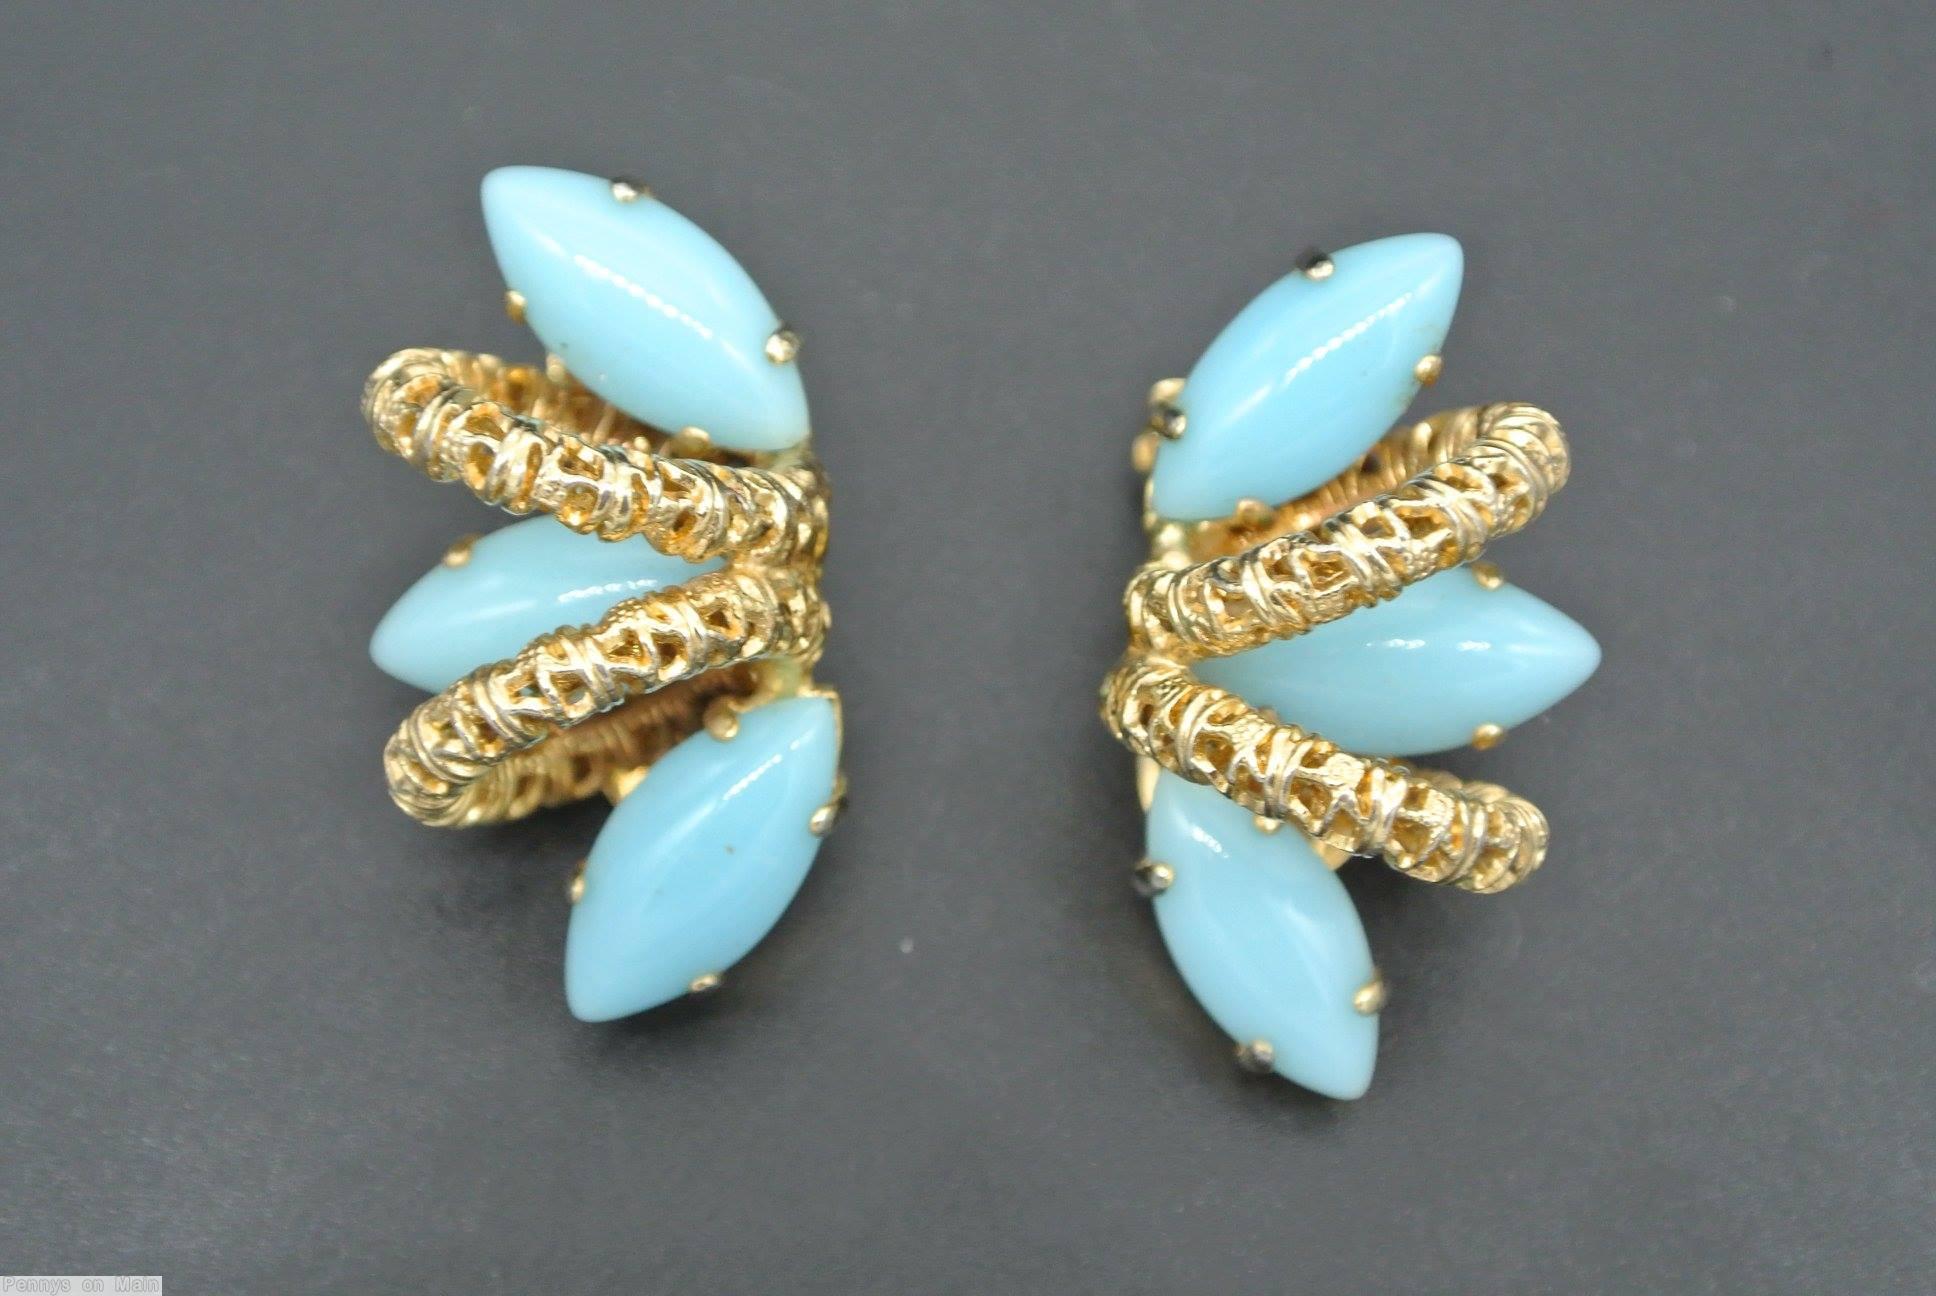 Schreiner 3 navette 2 metal arch side radial earring baby blue opaque navette goldtone jewelry